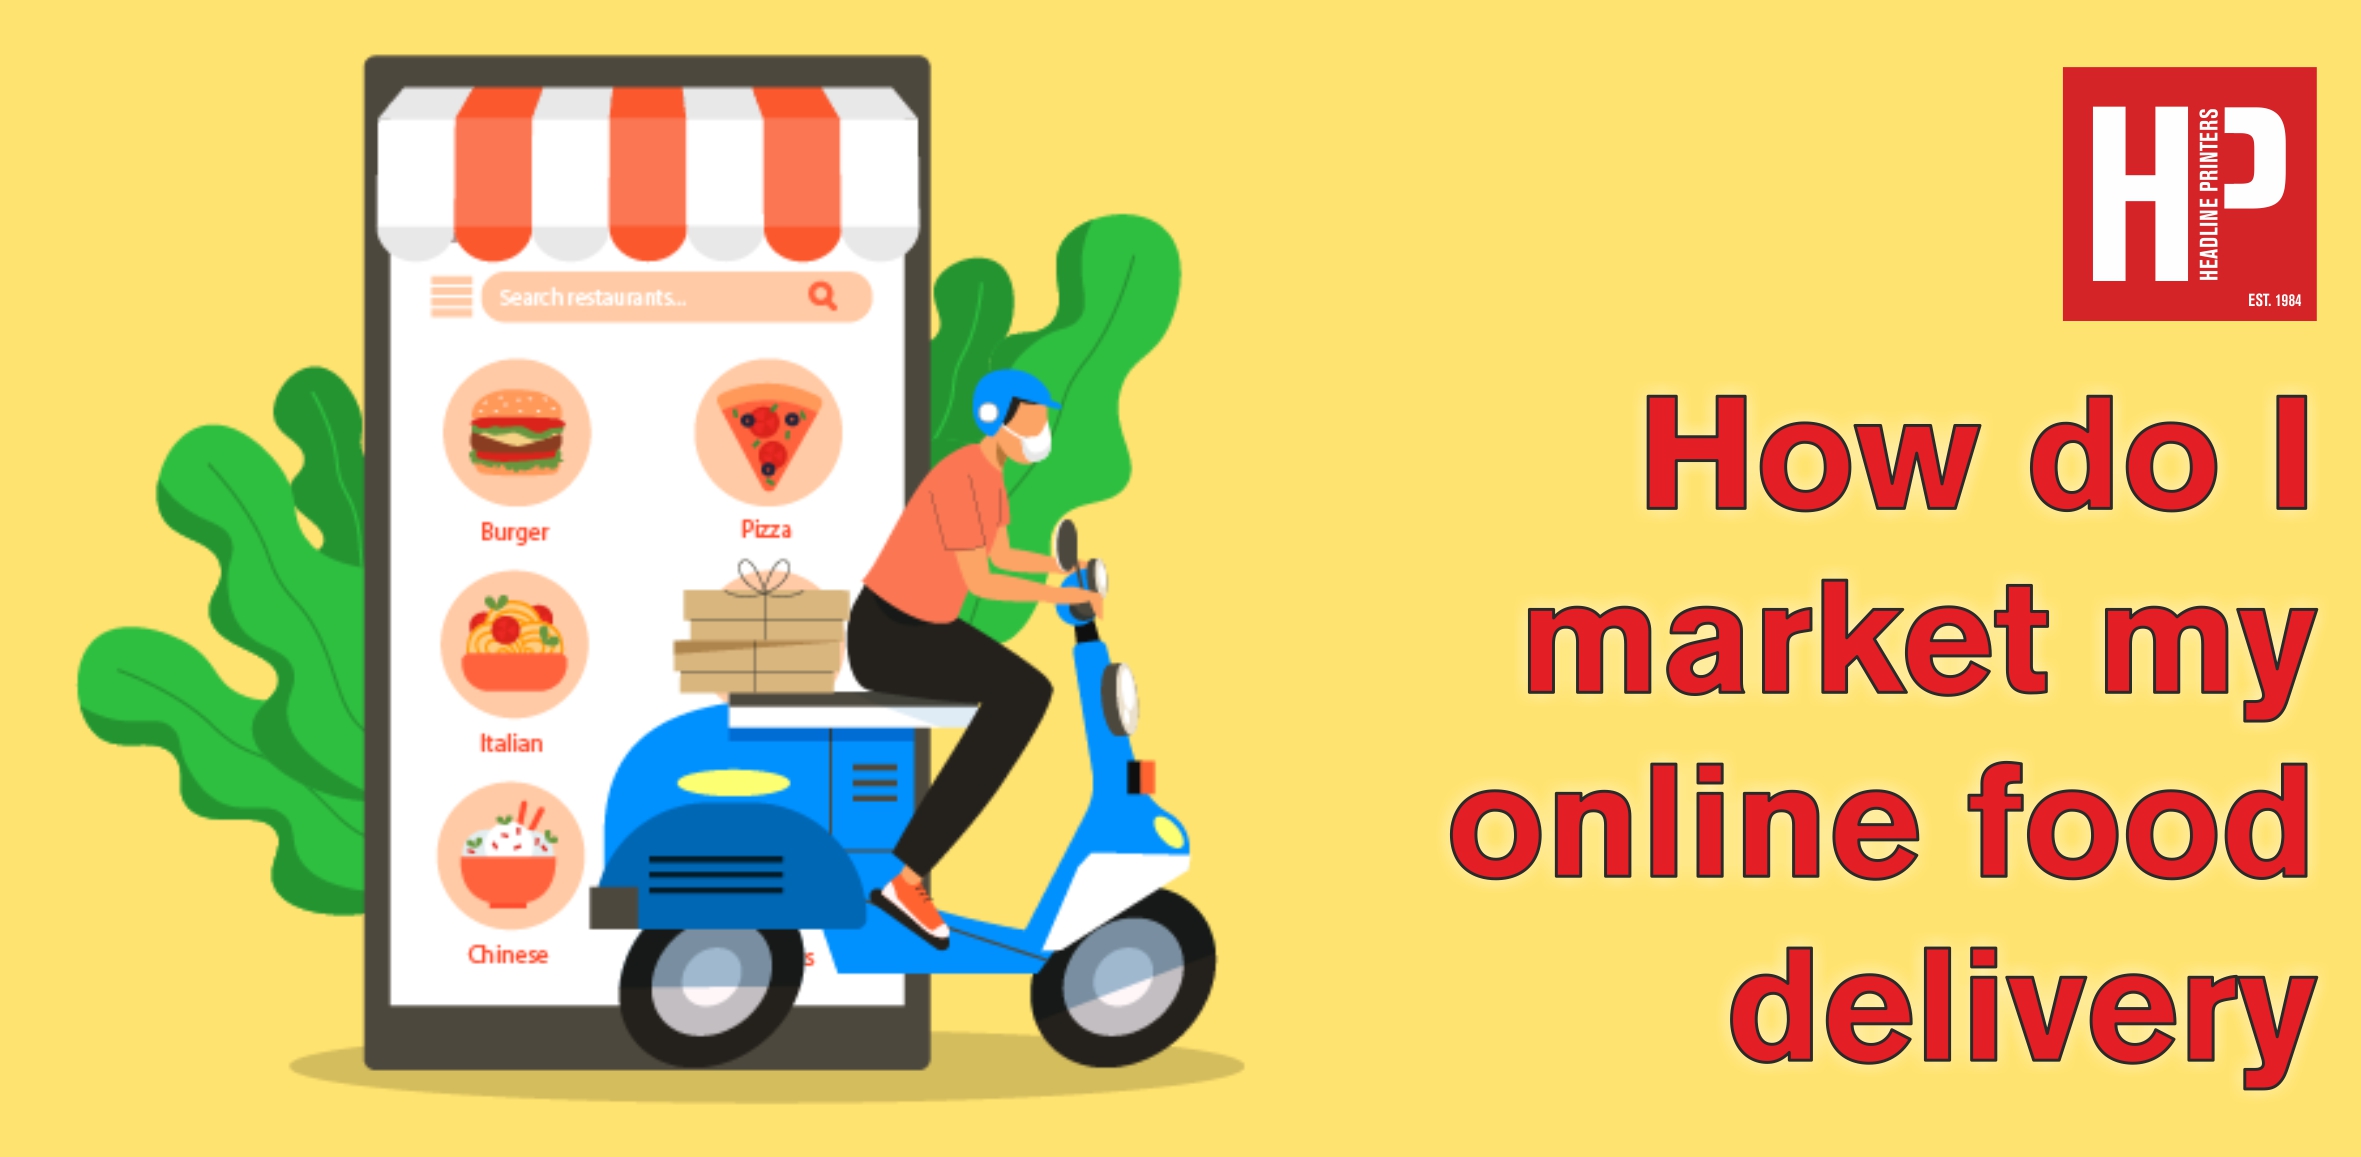 How do I market my online food delivery company